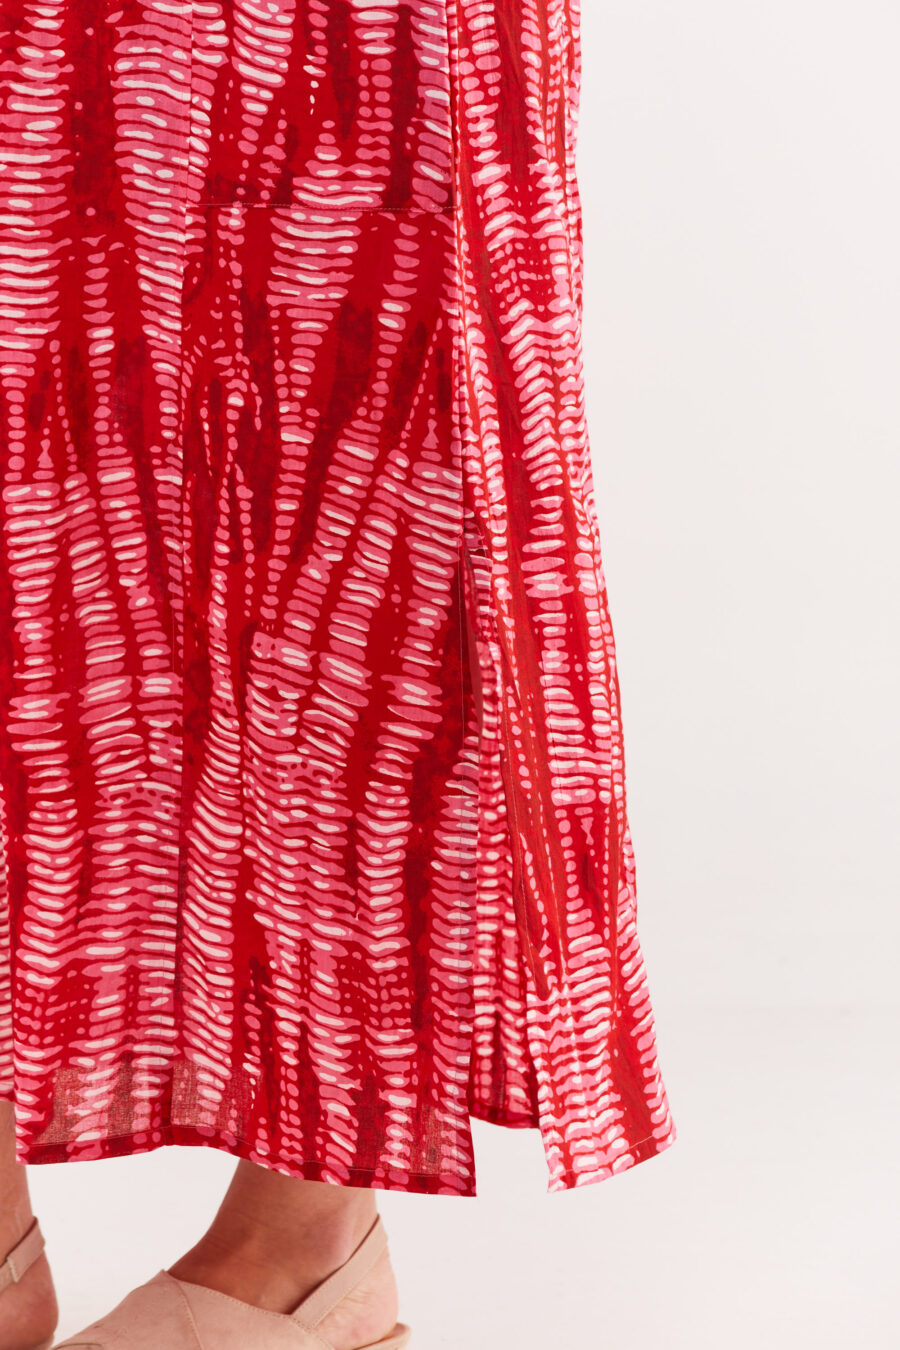 Jalabiya dress | Uniquely designed dress - Stone red print, pink dress with red stone-like print by comfort zone boutique